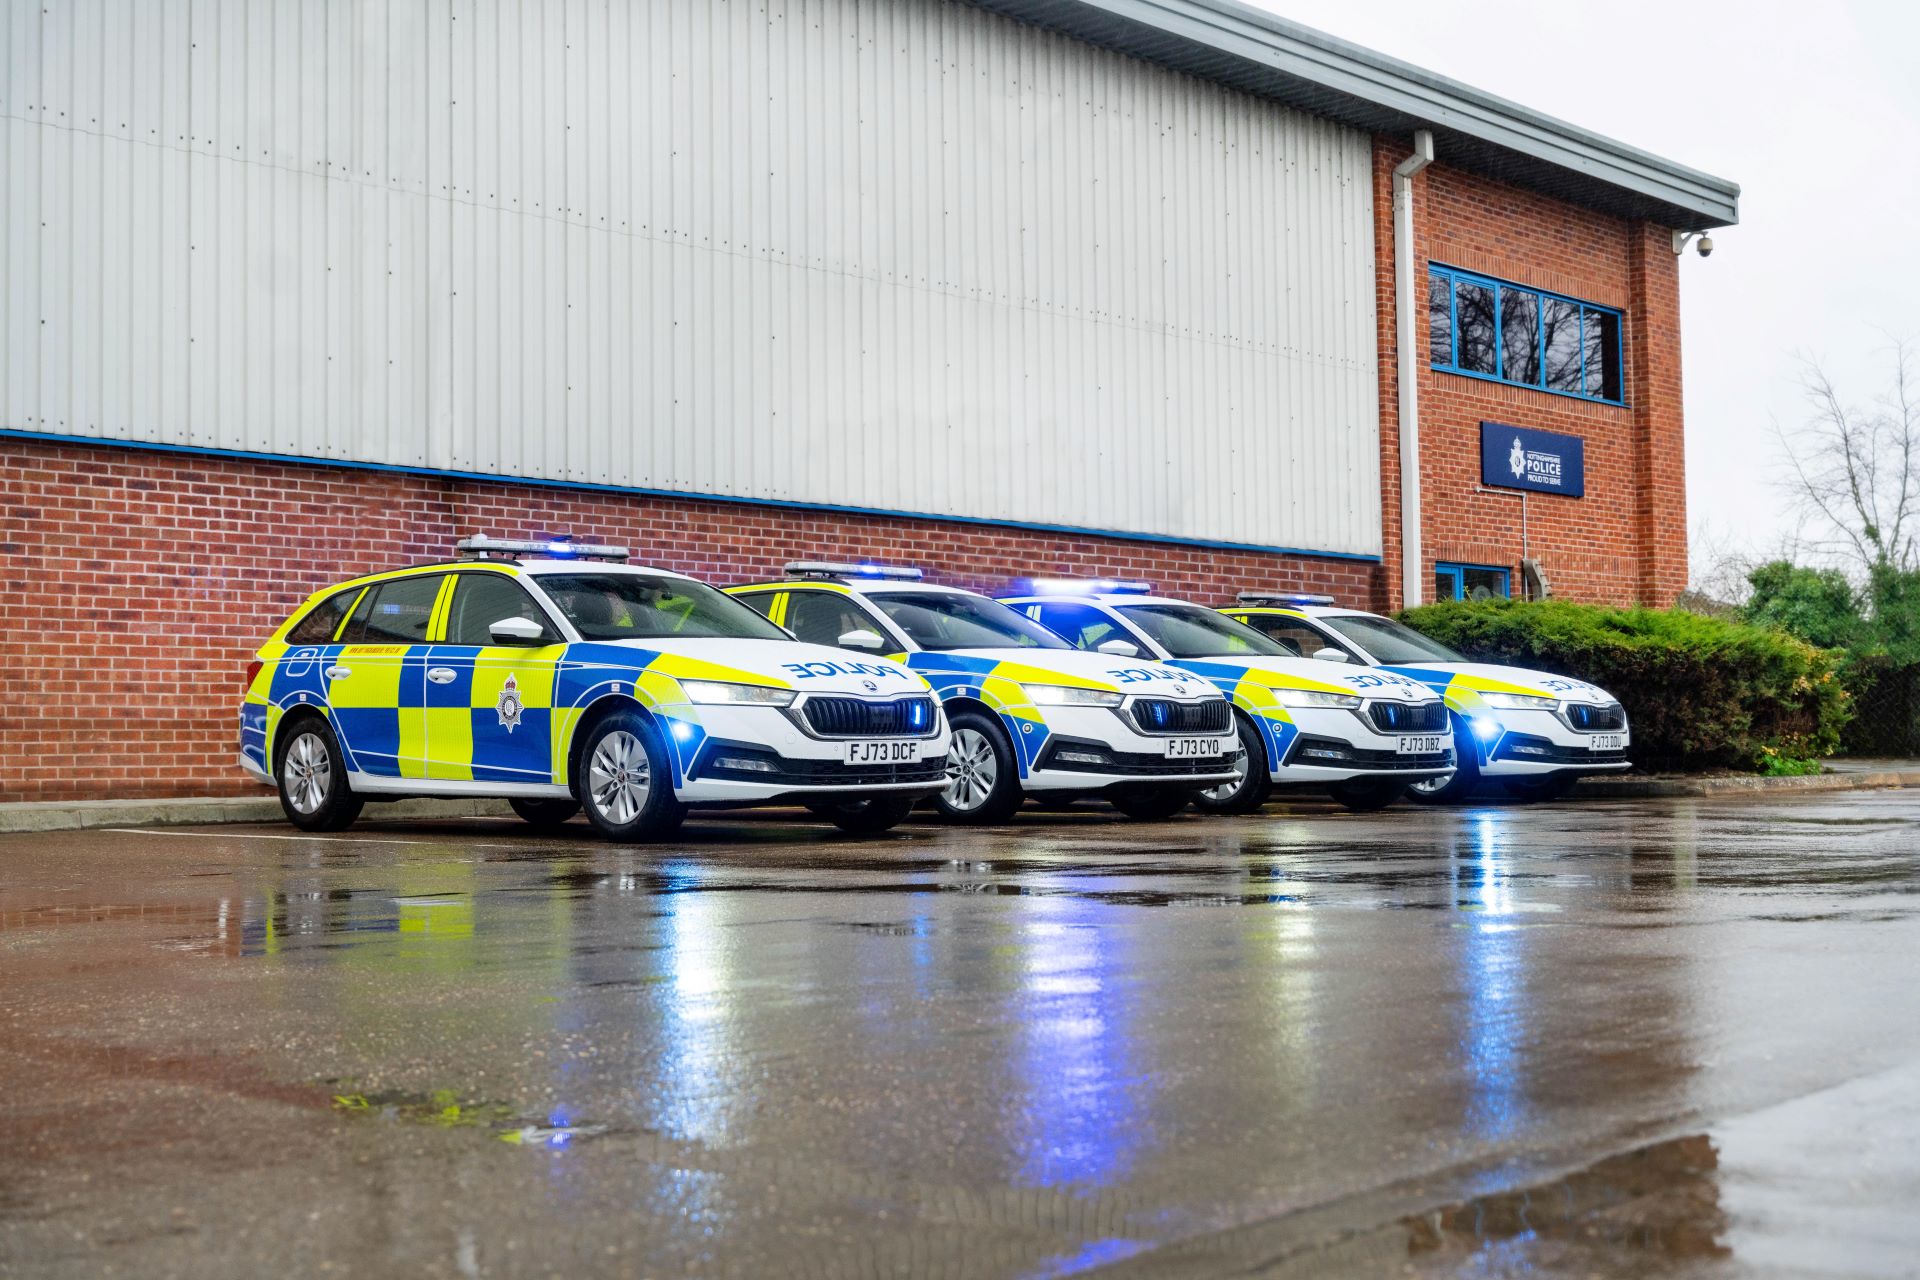 The force is strong: Nottinghamshire Police adds 100 new Škoda cars to its emergency fleet